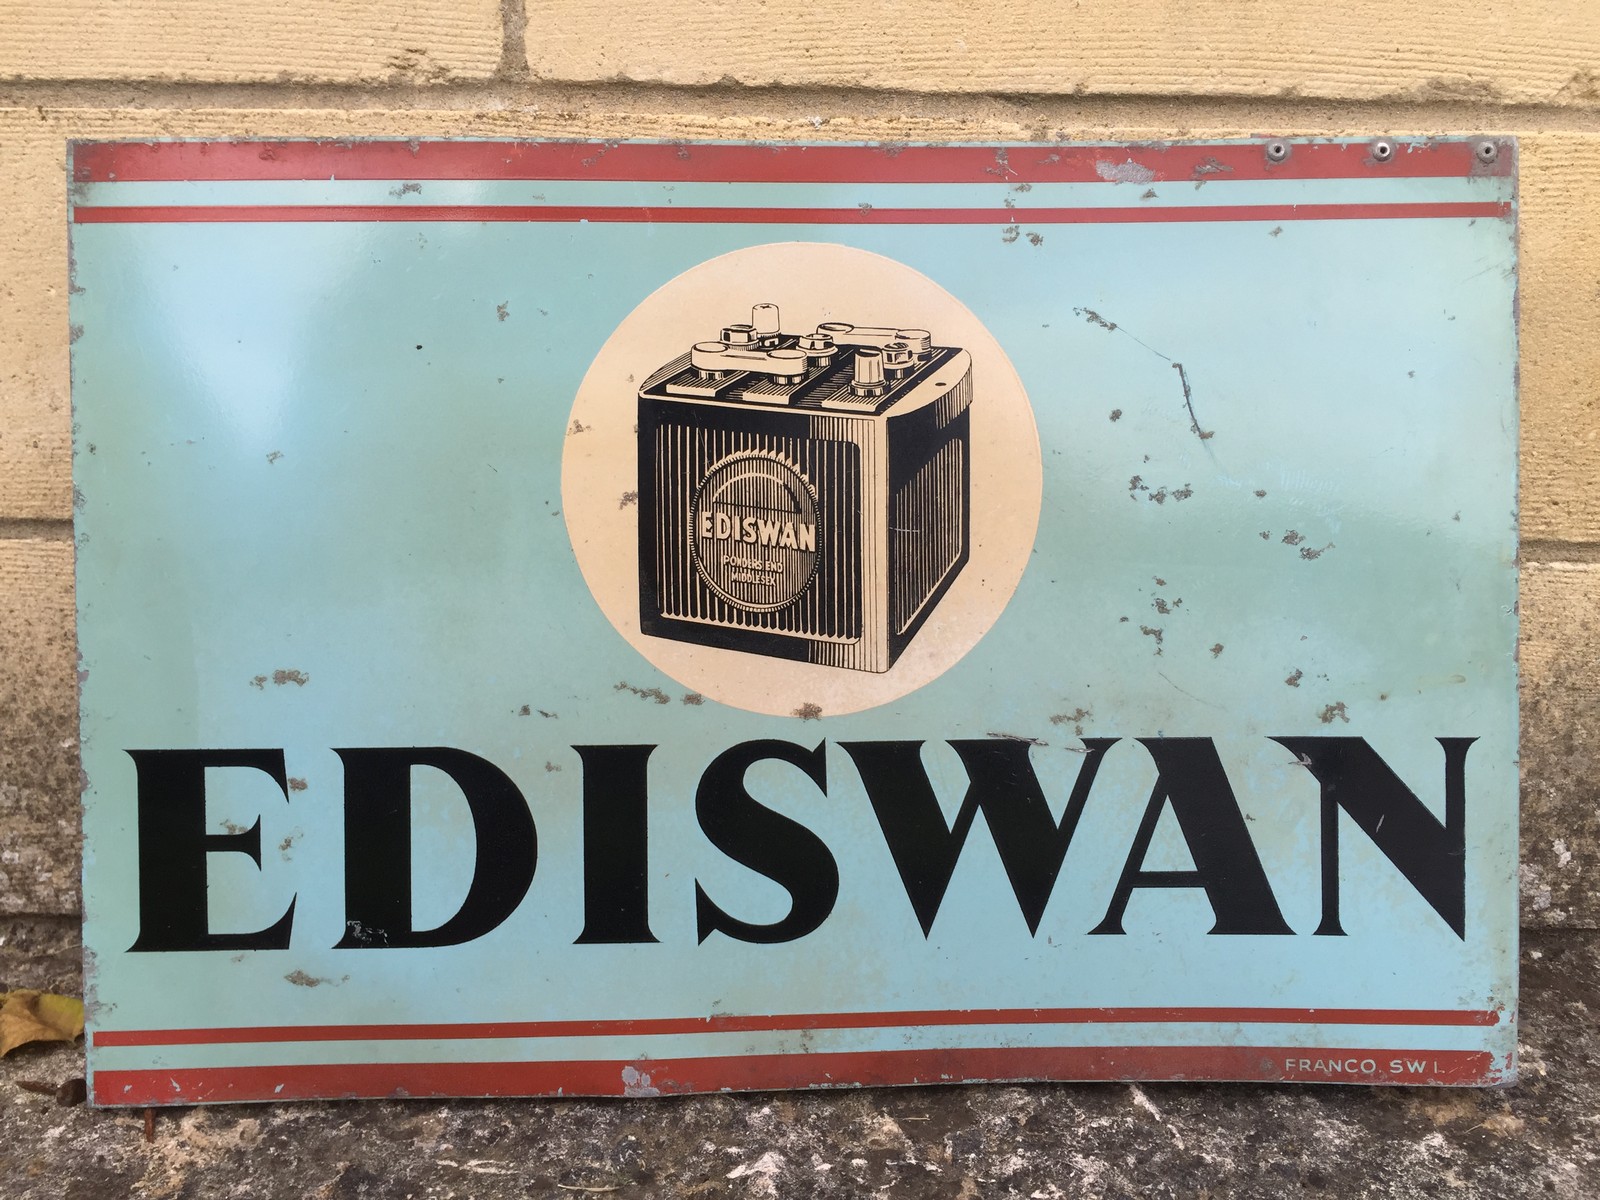 An Ediswan Batteries aluminium double sided advertising sign with hanging flange, by Franco, 18 x - Image 2 of 2